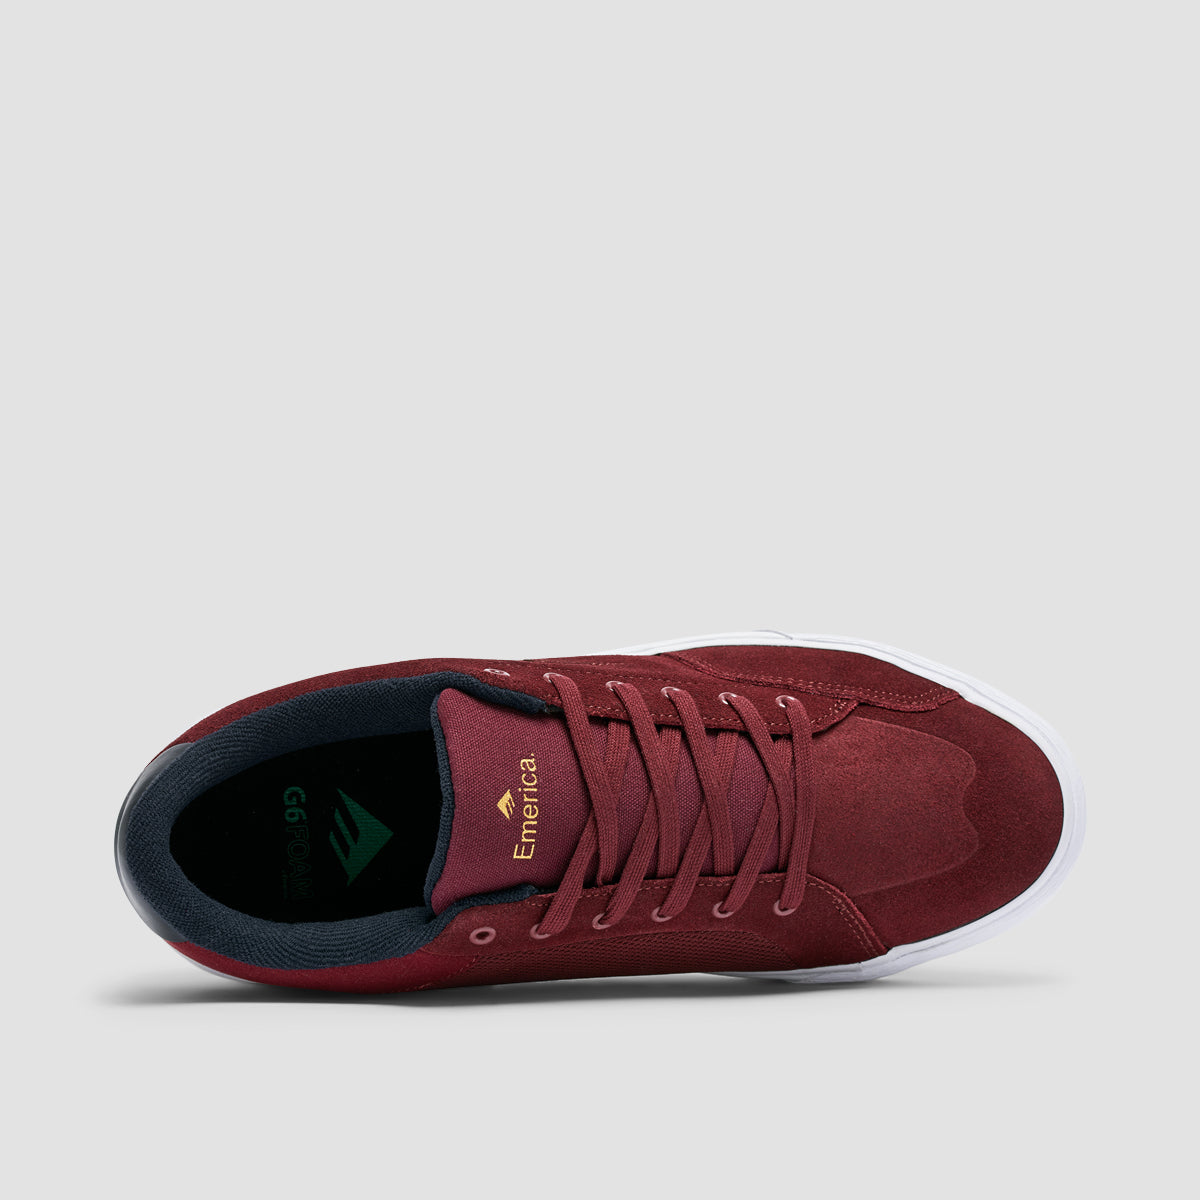 Emerica Temple Shoes Burgundy